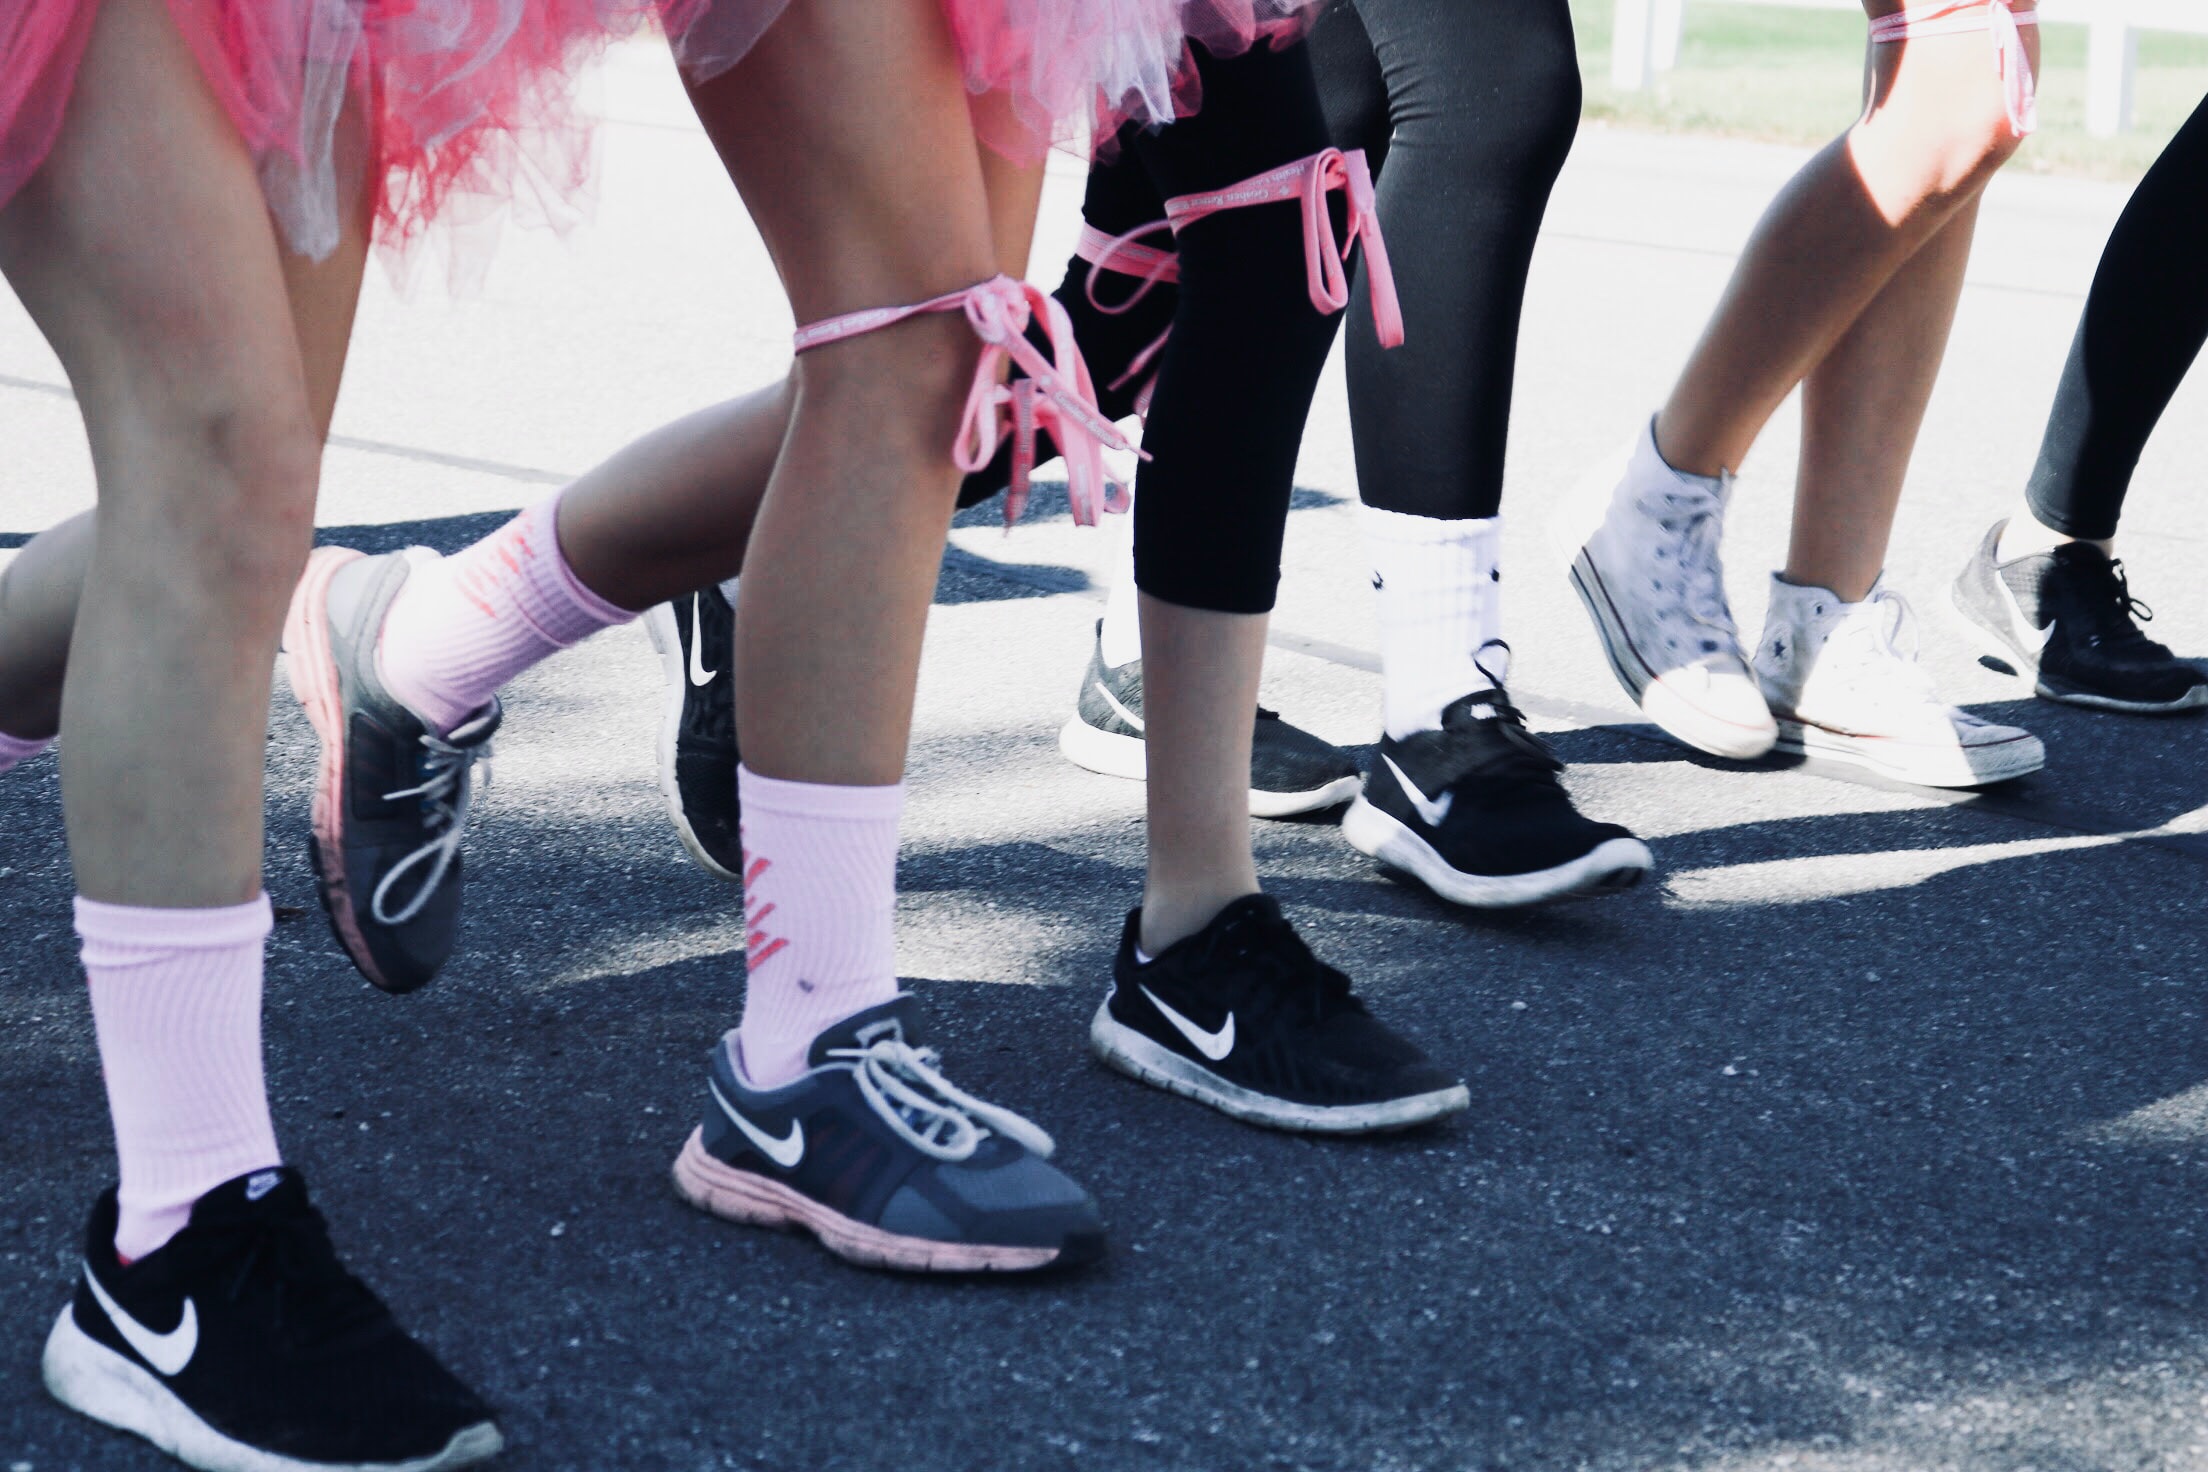 Photo of runners legs at the starting line with some runners having pink ribbons tied across their thighs for breast cancer awareness